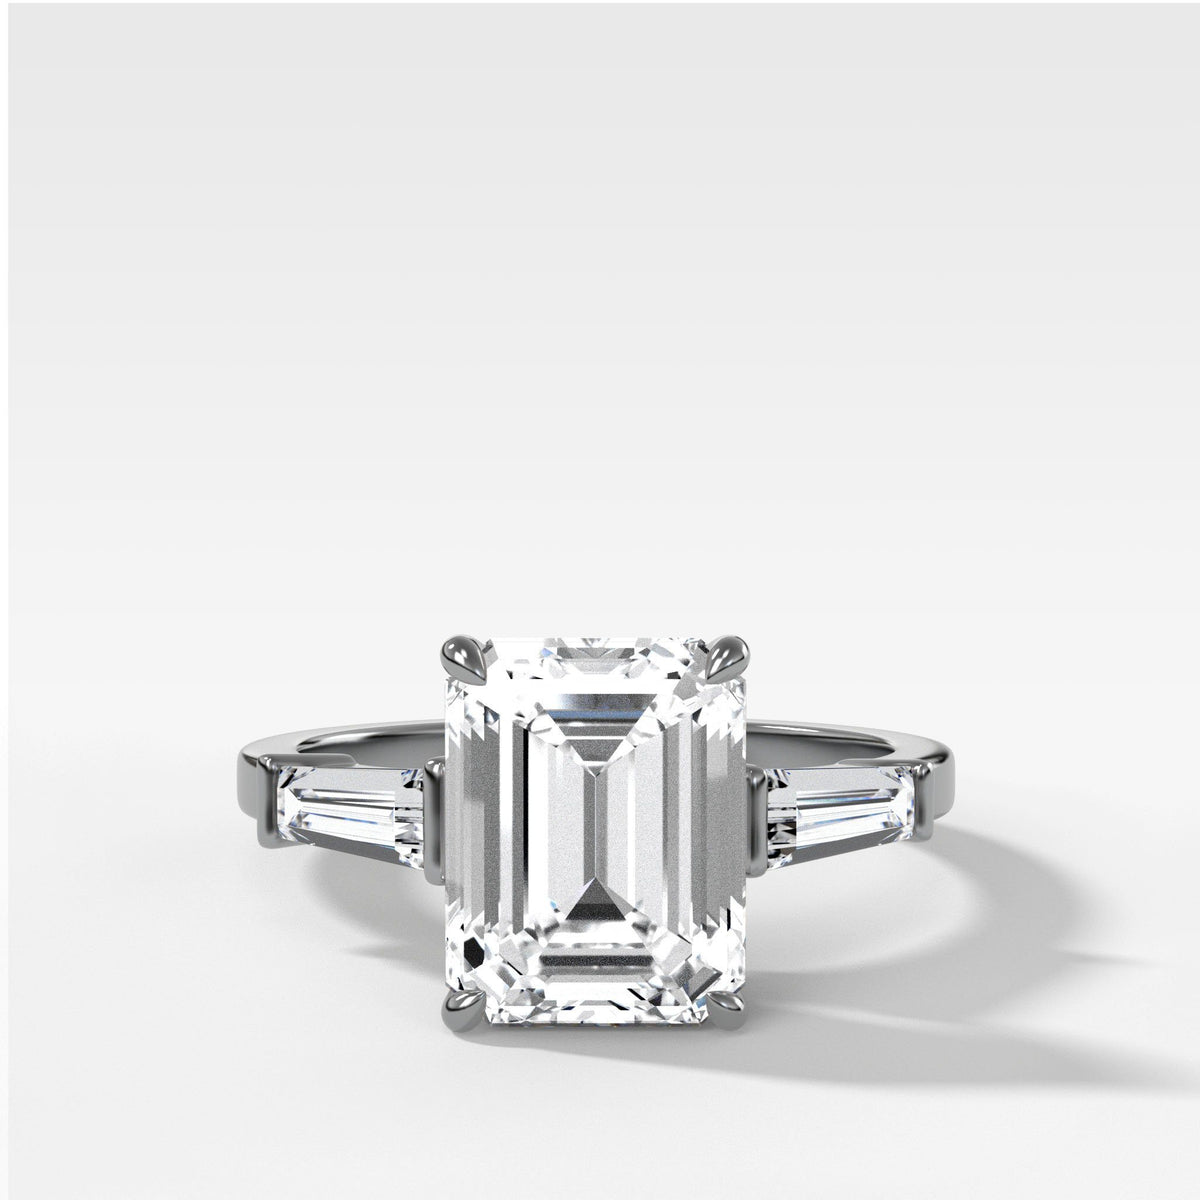 Translunar Tapered Baguette Engagement Ring With Emerald Cut by Good Stone in White Gold